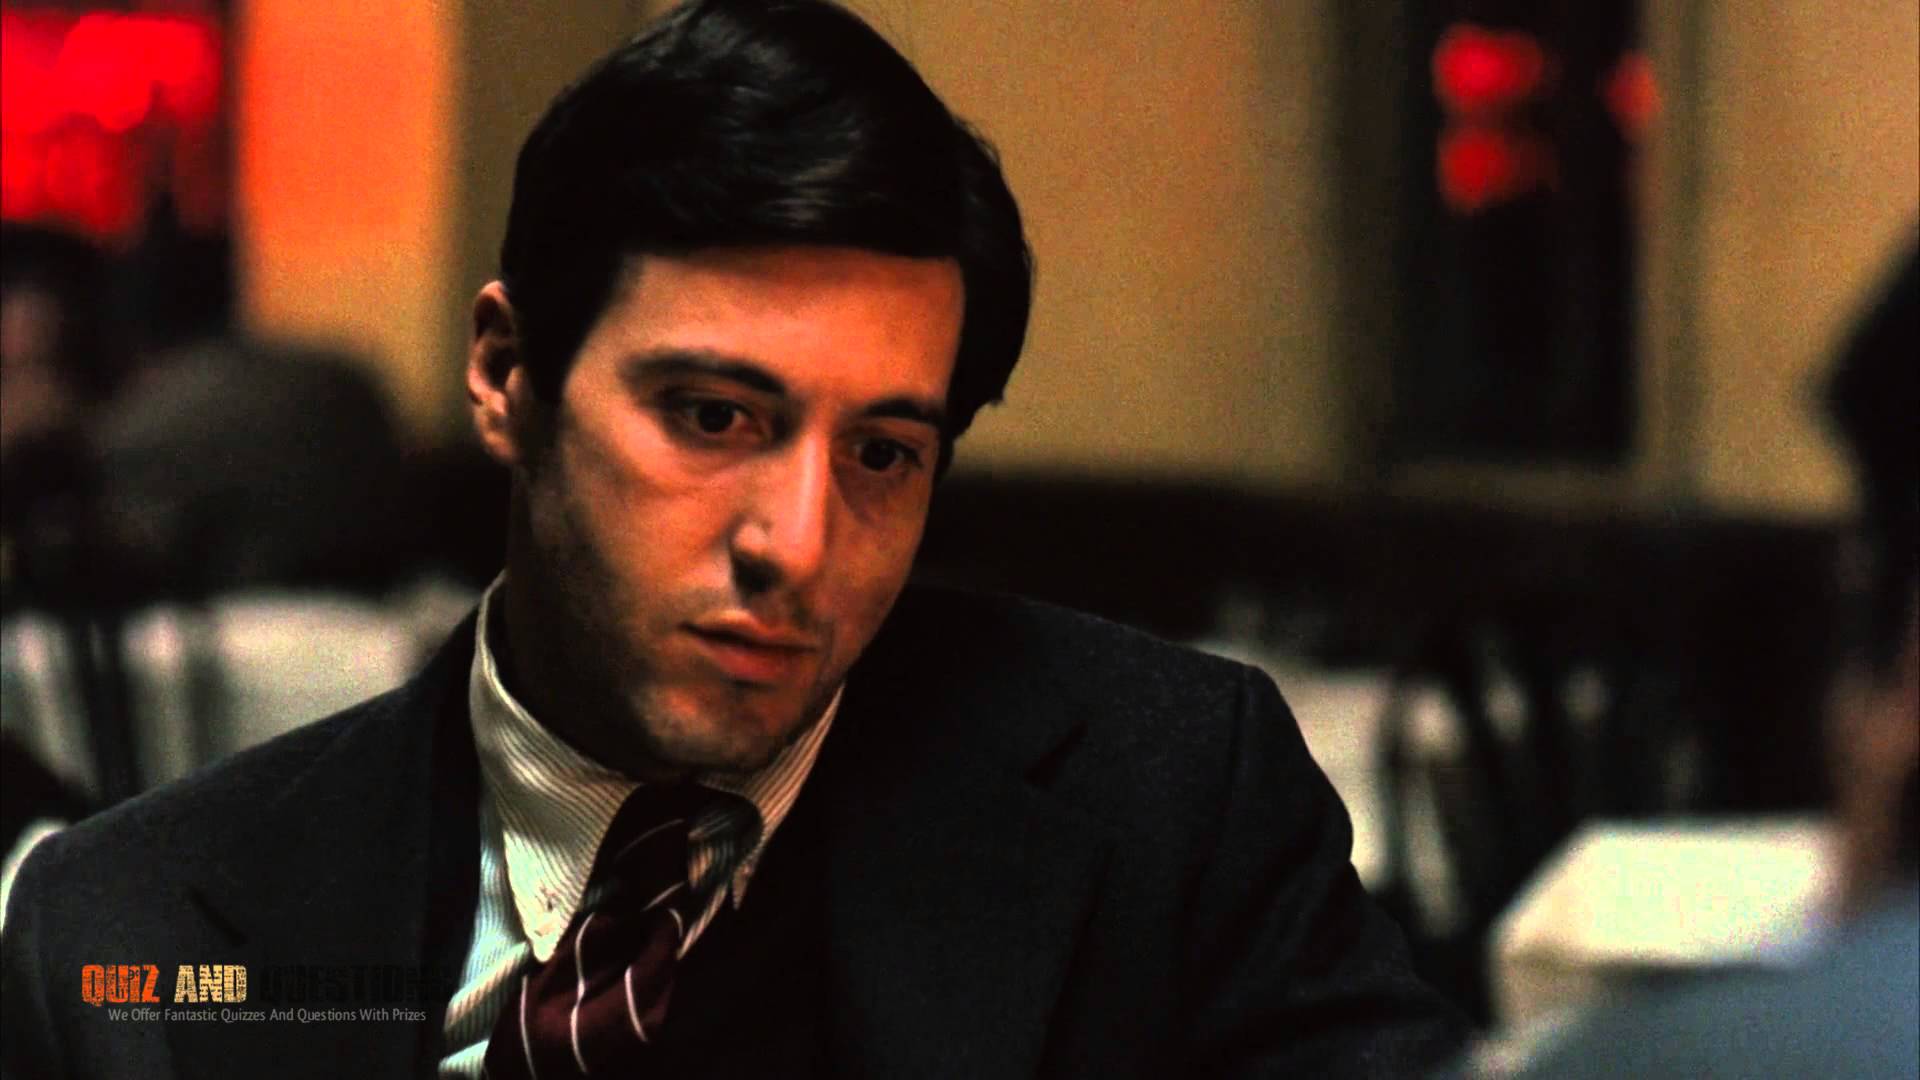 image For > Michael Corleone Posters